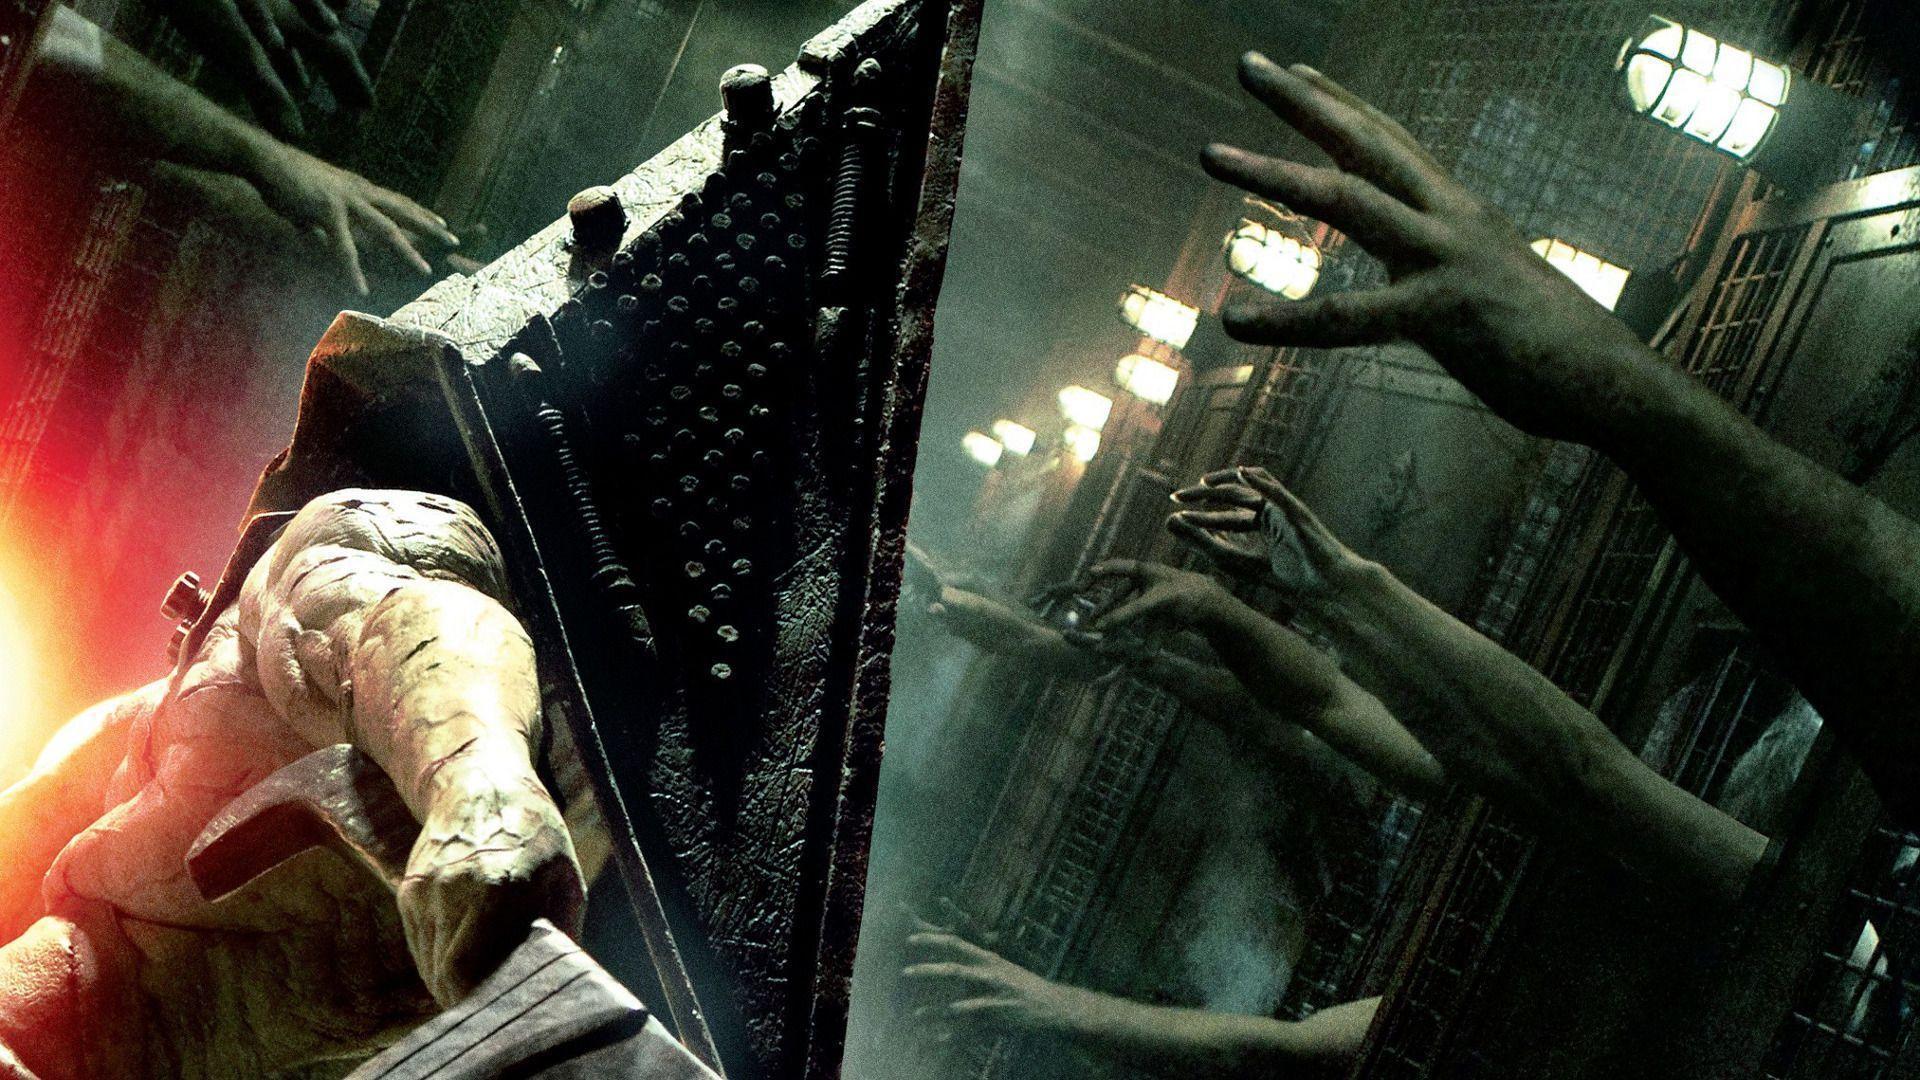 image For > Silent Hill Revelation Pyramid Head Wallpaper